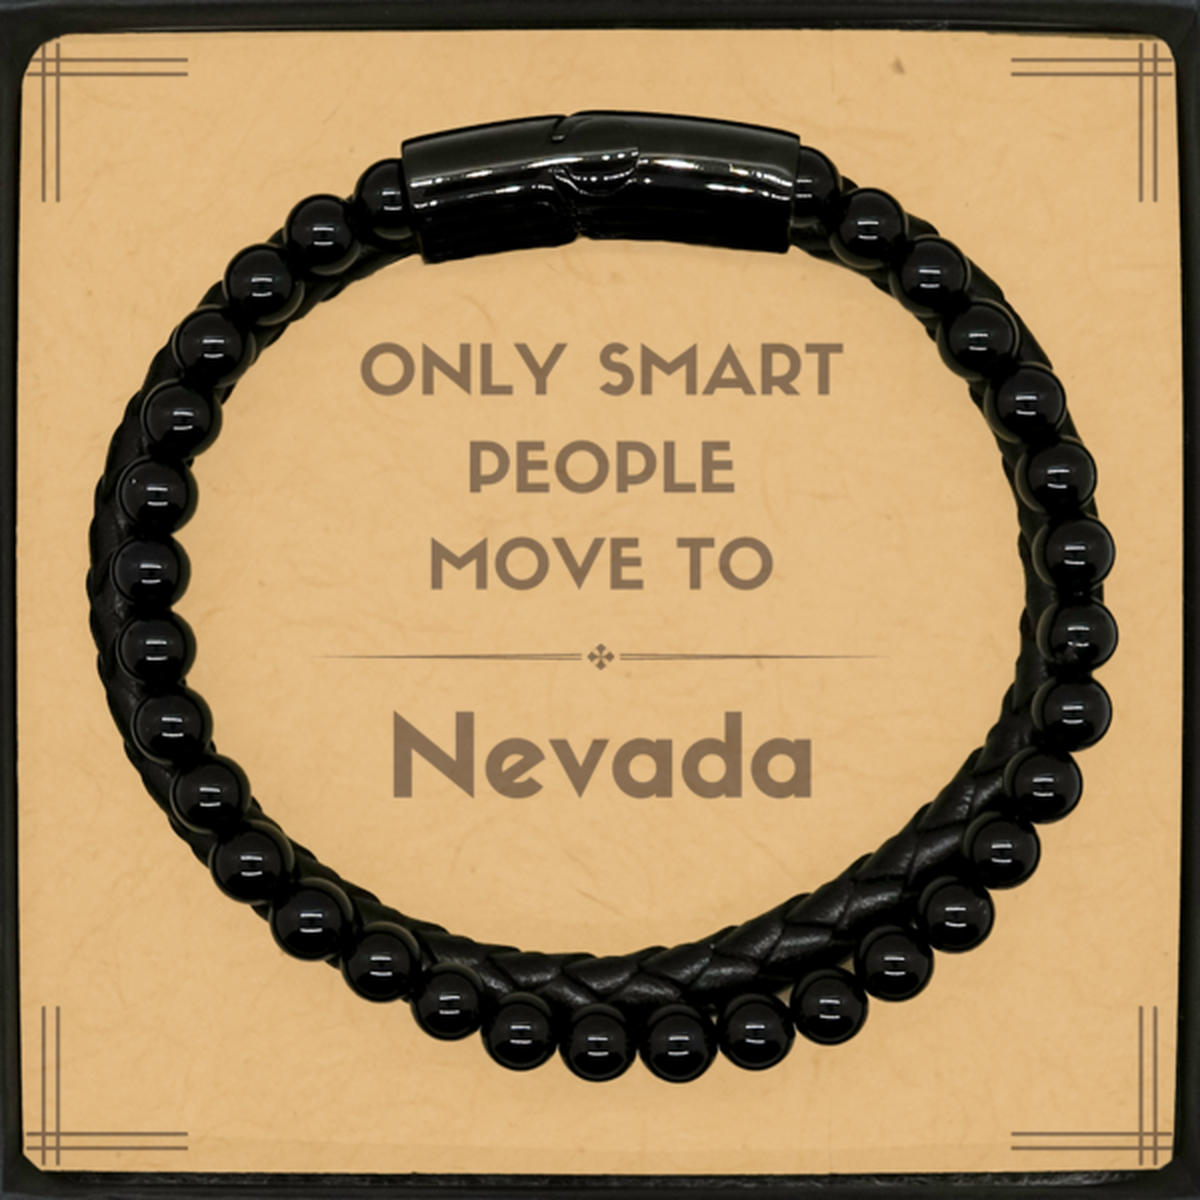 Only smart people move to Nevada Stone Leather Bracelets, Message Card Gifts For Nevada, Move to Nevada Gifts for Friends Coworker Funny Saying Quote